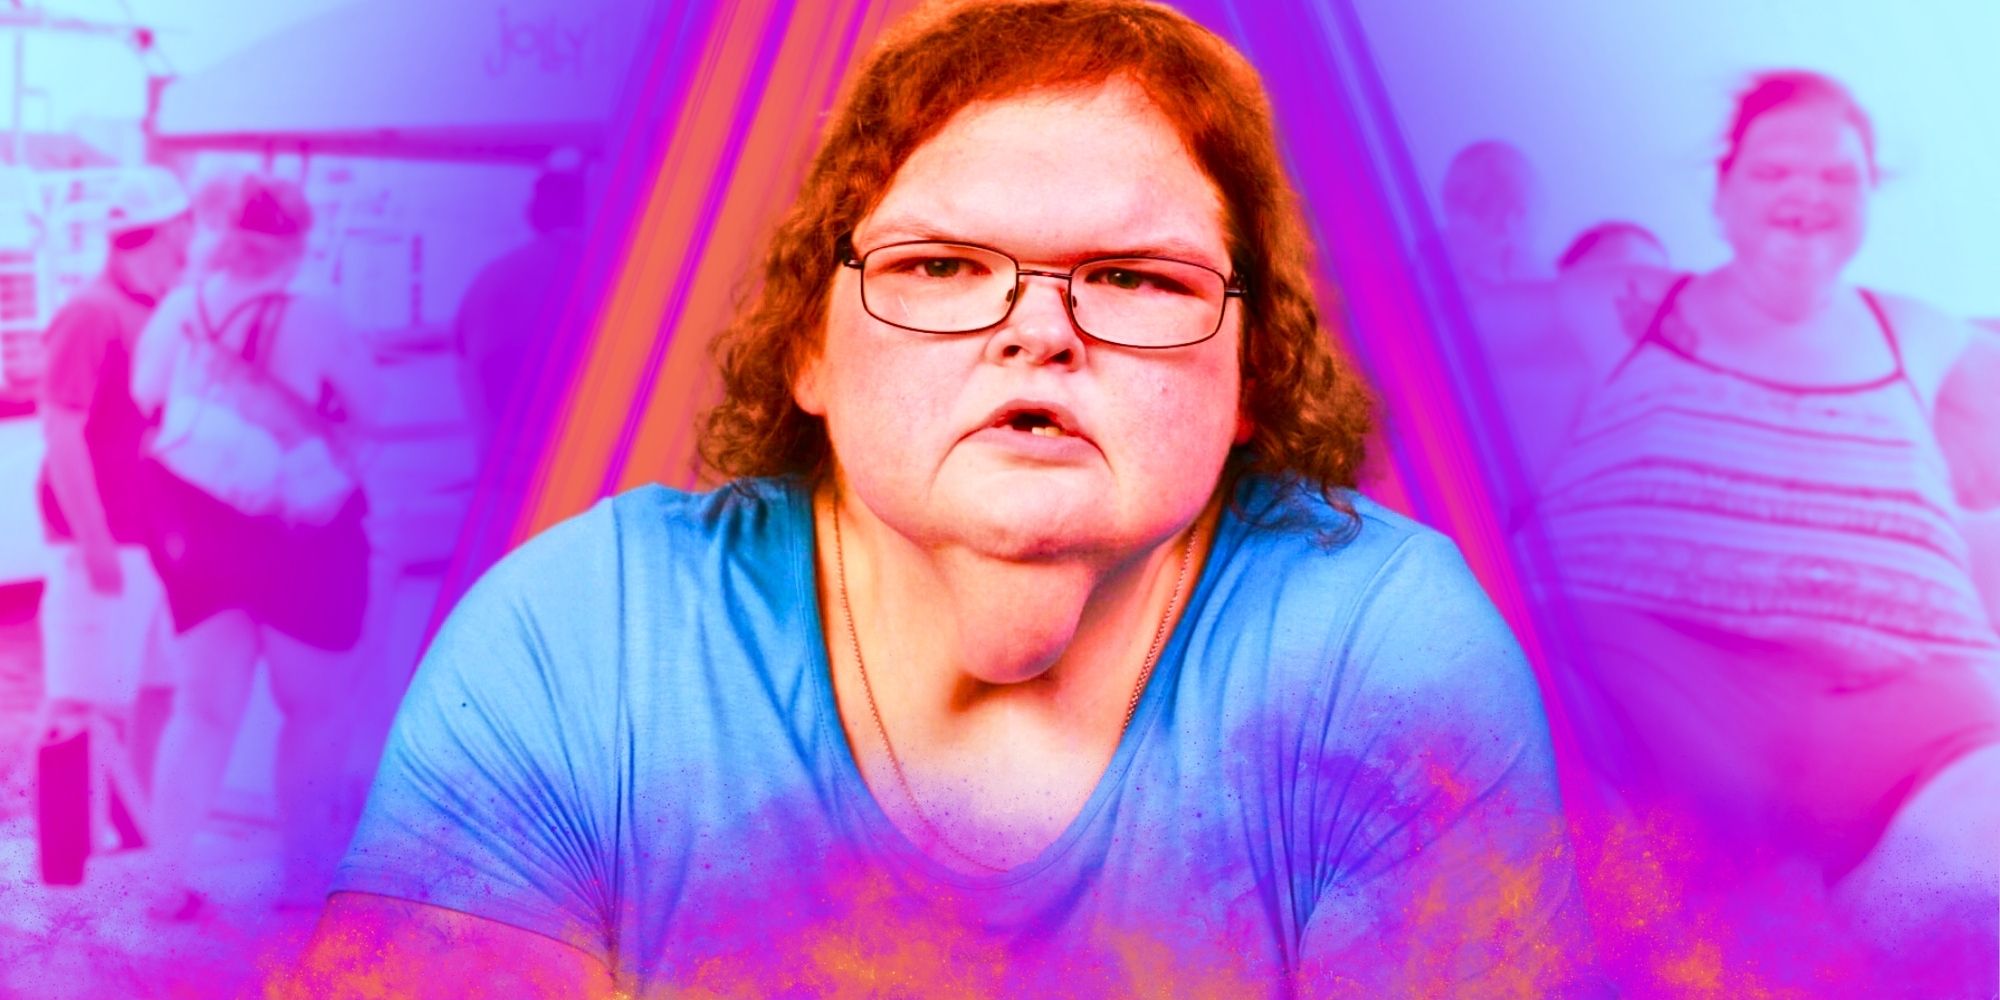 Montage of 1000-Lb Sisters' Tammy Slaton blue and pink background